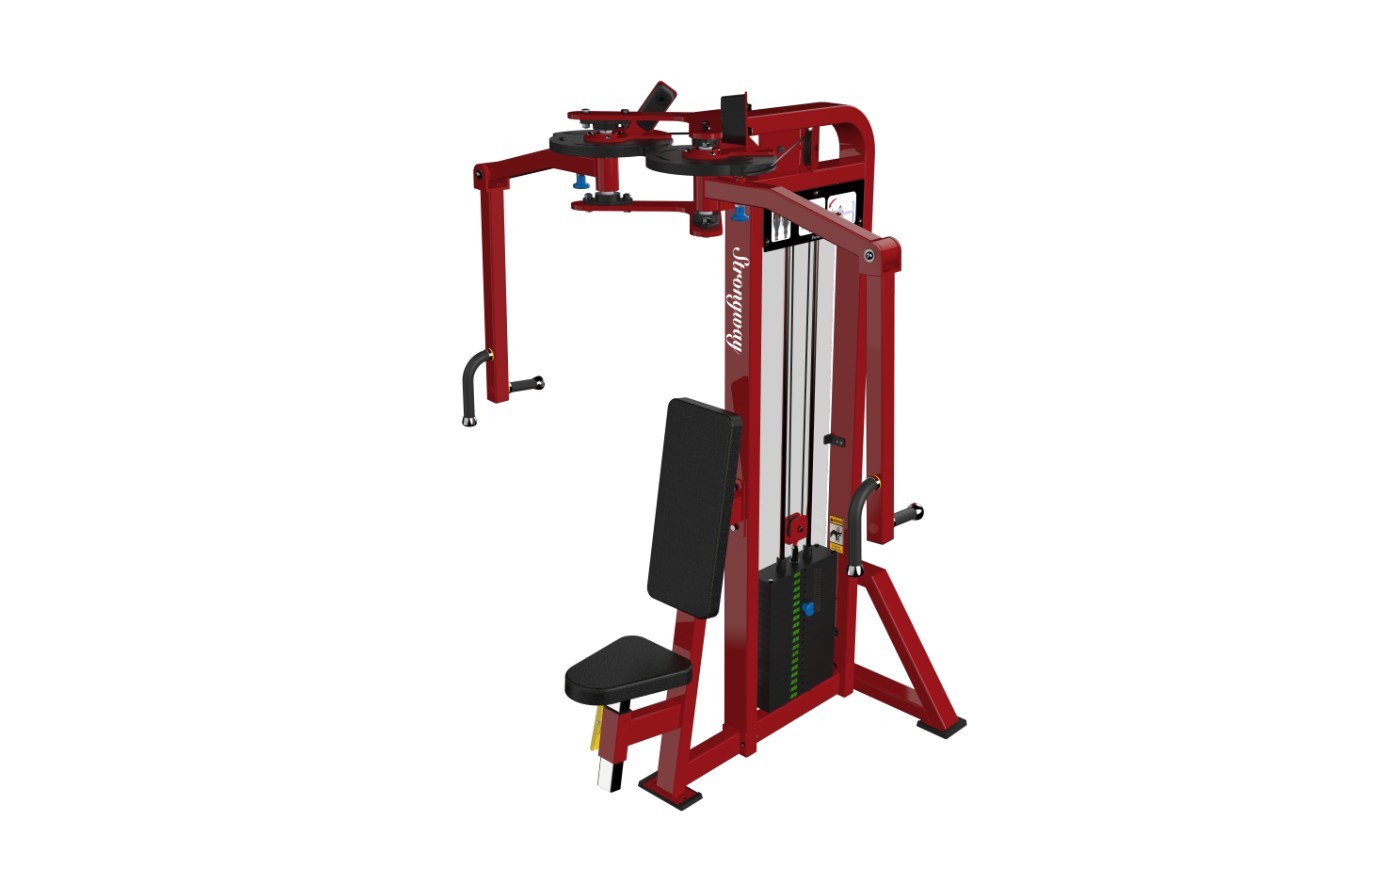 Action essentials of high position Buy Lat pulldown & low row Combo supplier china